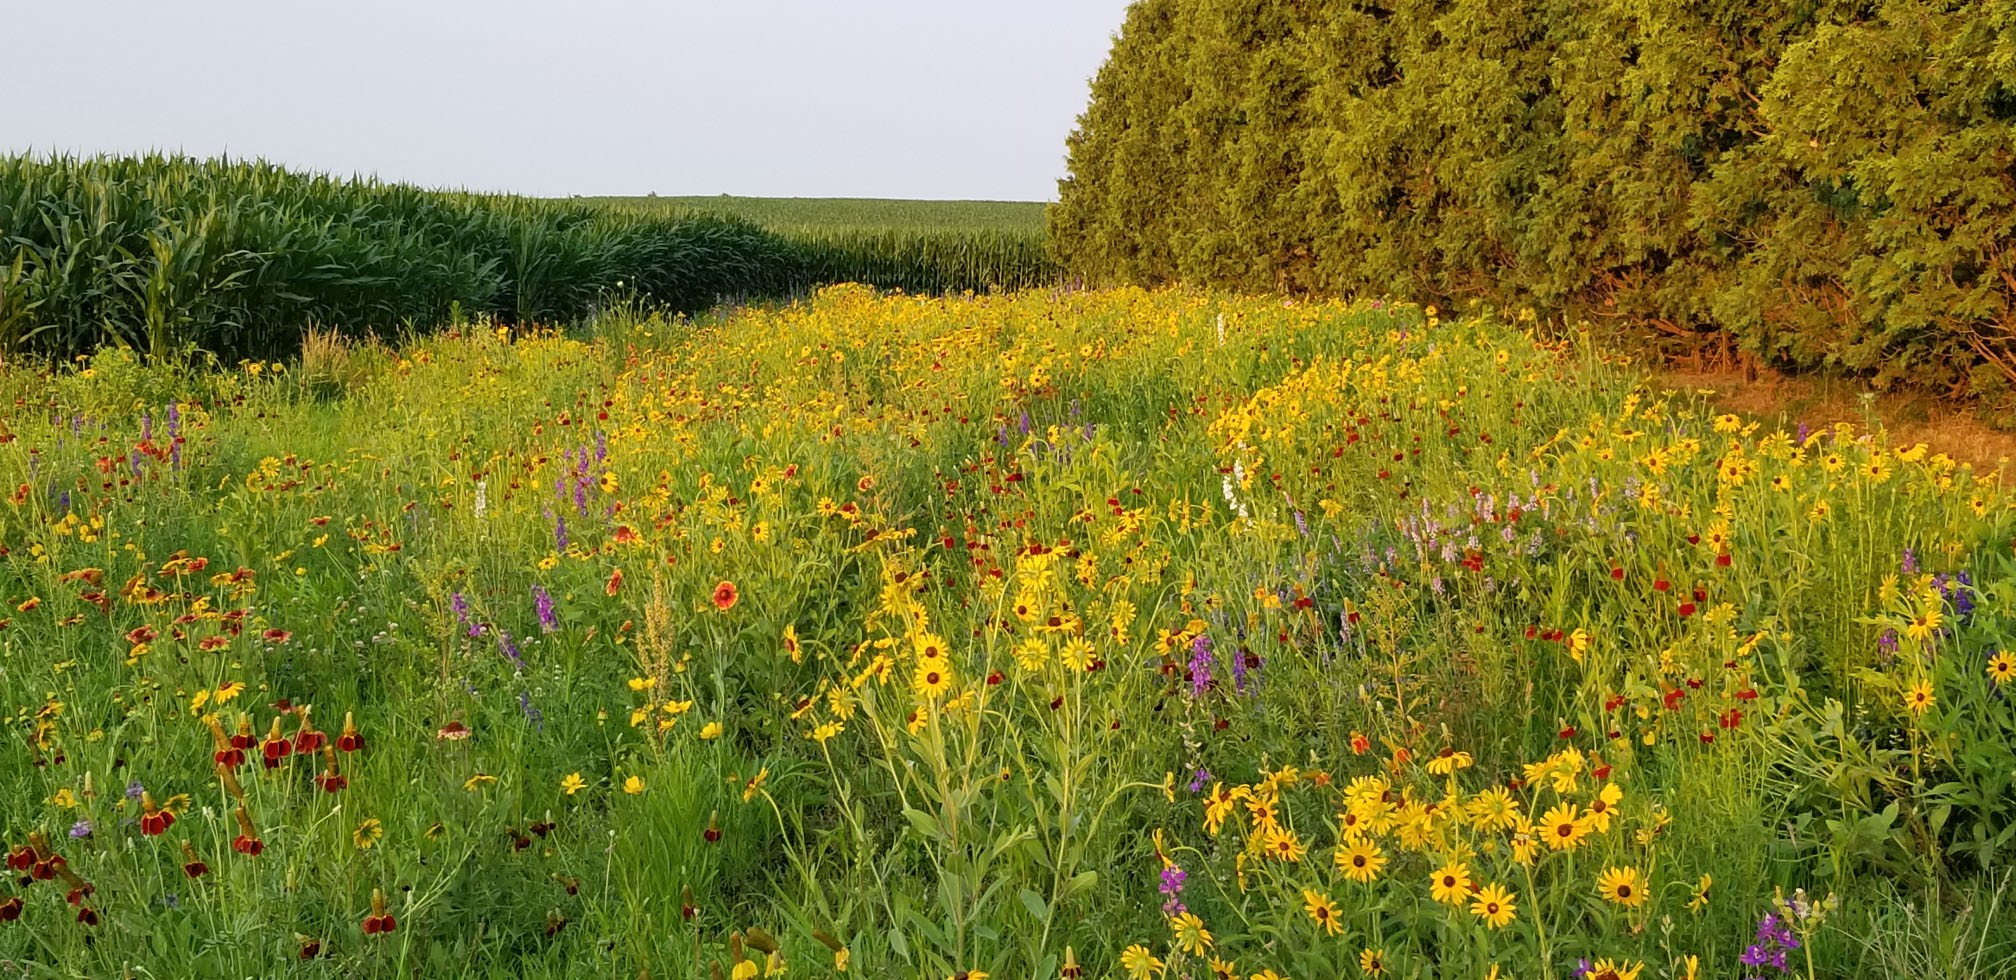 A native prairie garden is ideal for attracting pollina